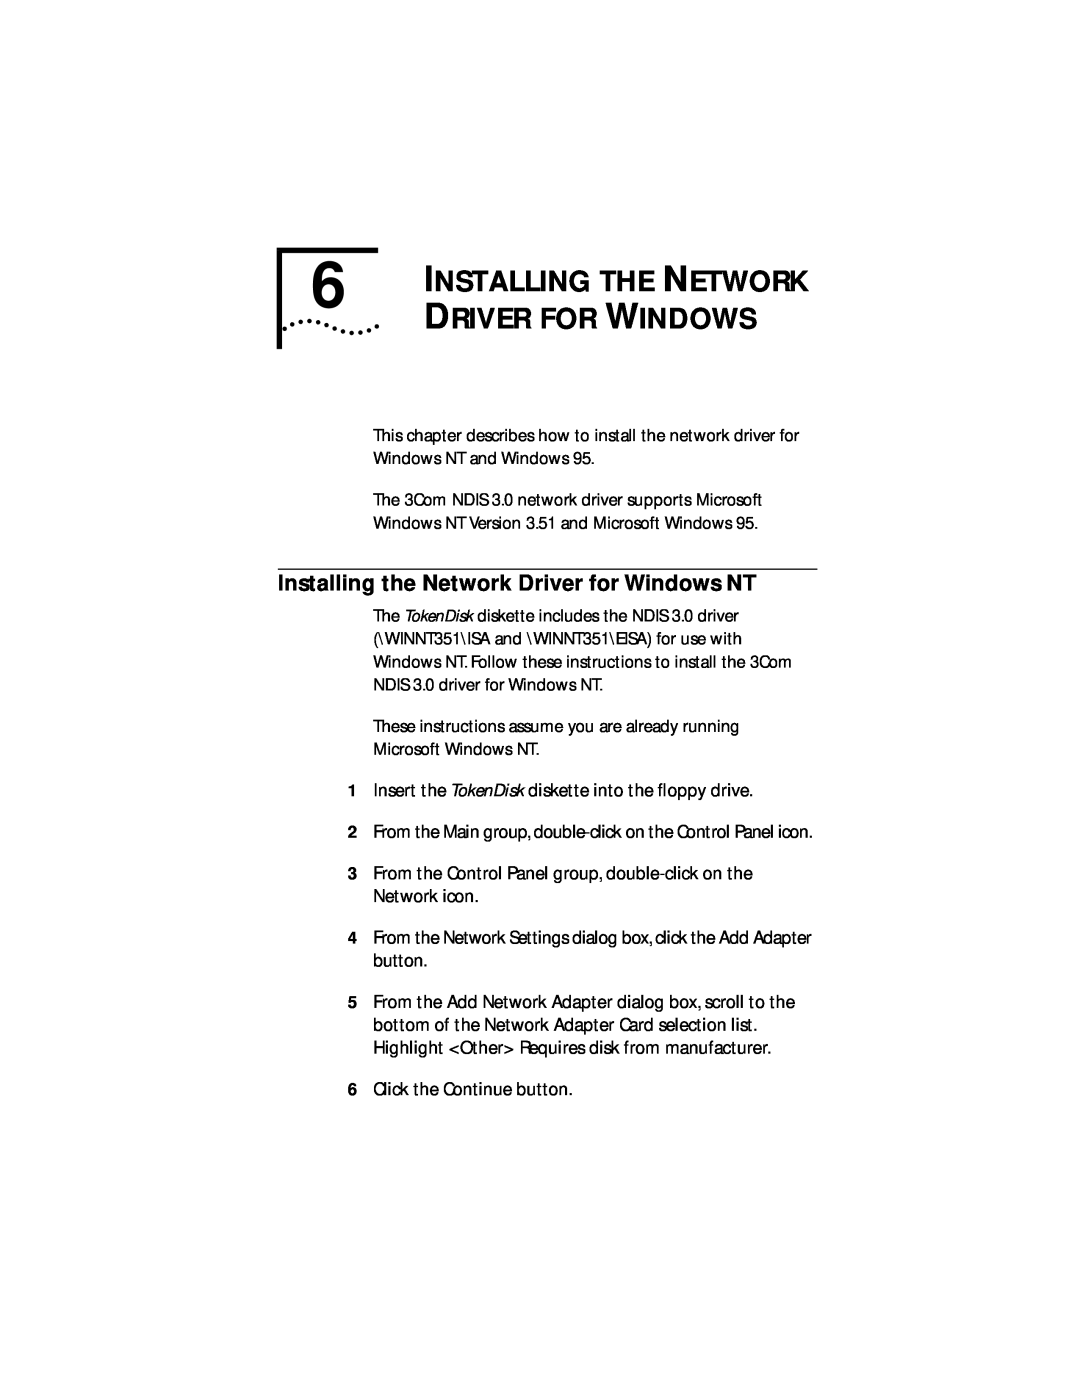 IBM 09-0572-000 manual Installing The Network, Driver For Windows, Installing the Network Driver for Windows NT 